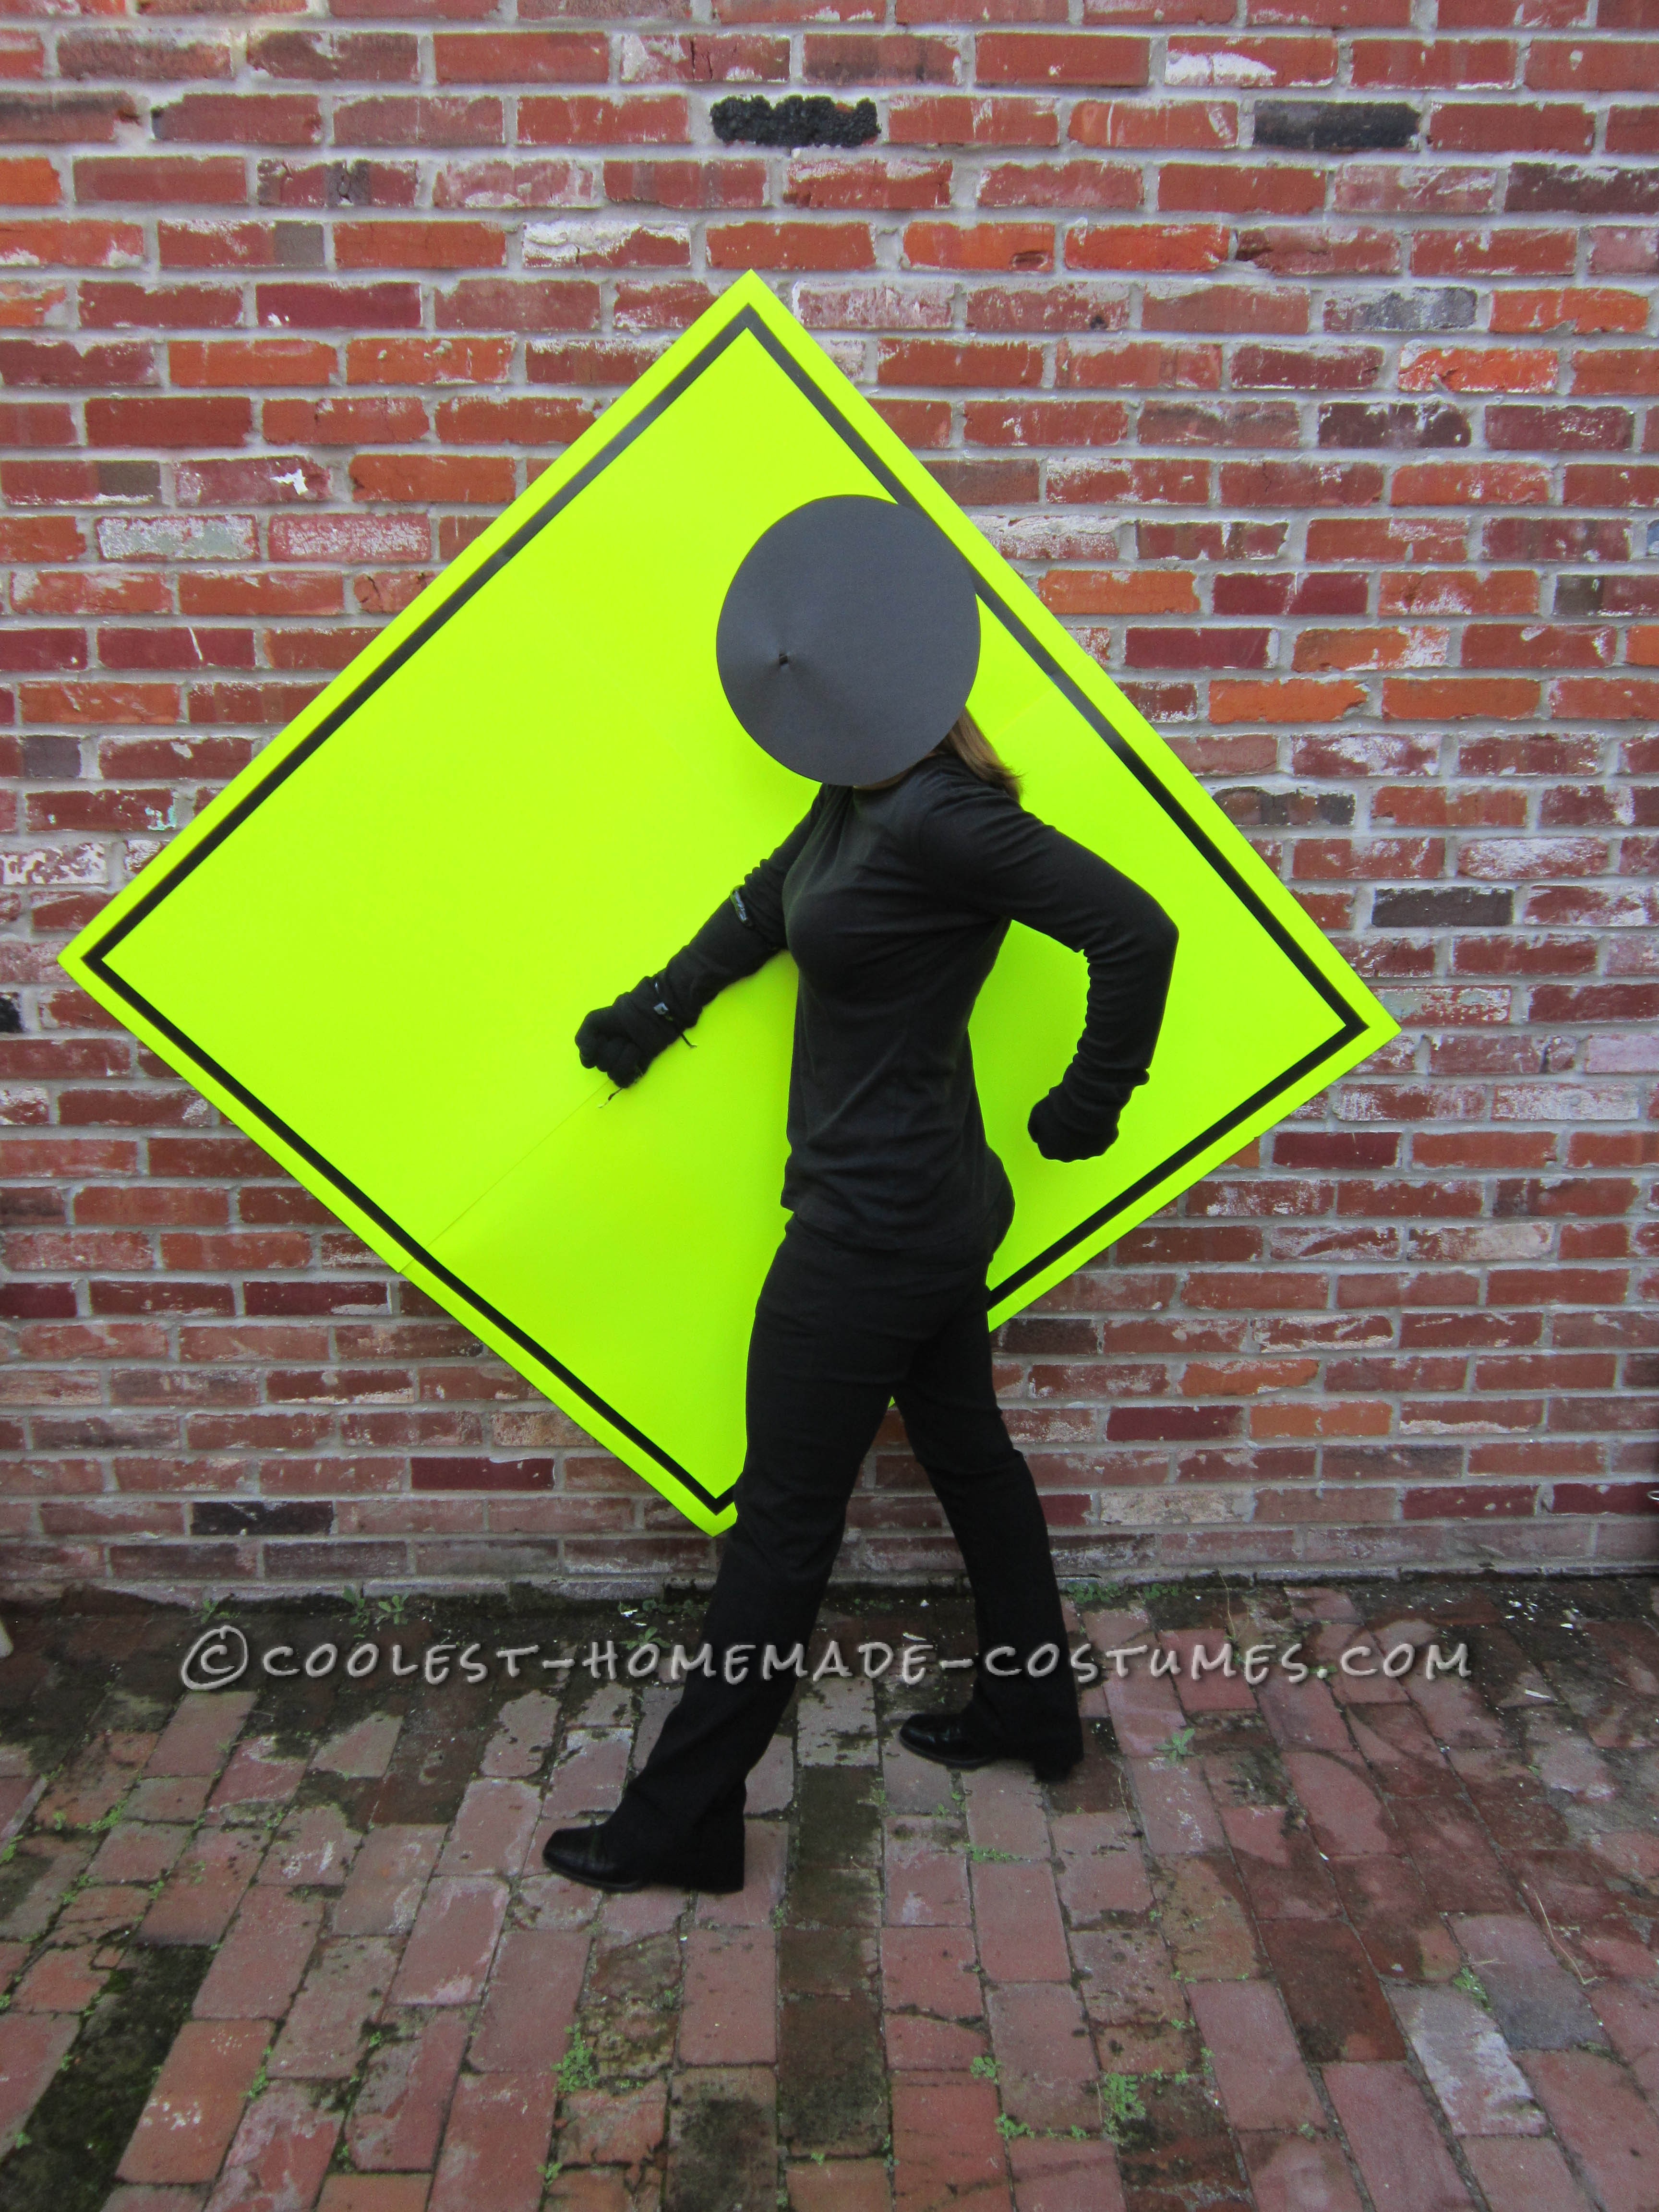 Easy and Cheap Homemade Costume Idea: Pedestrian Crossing